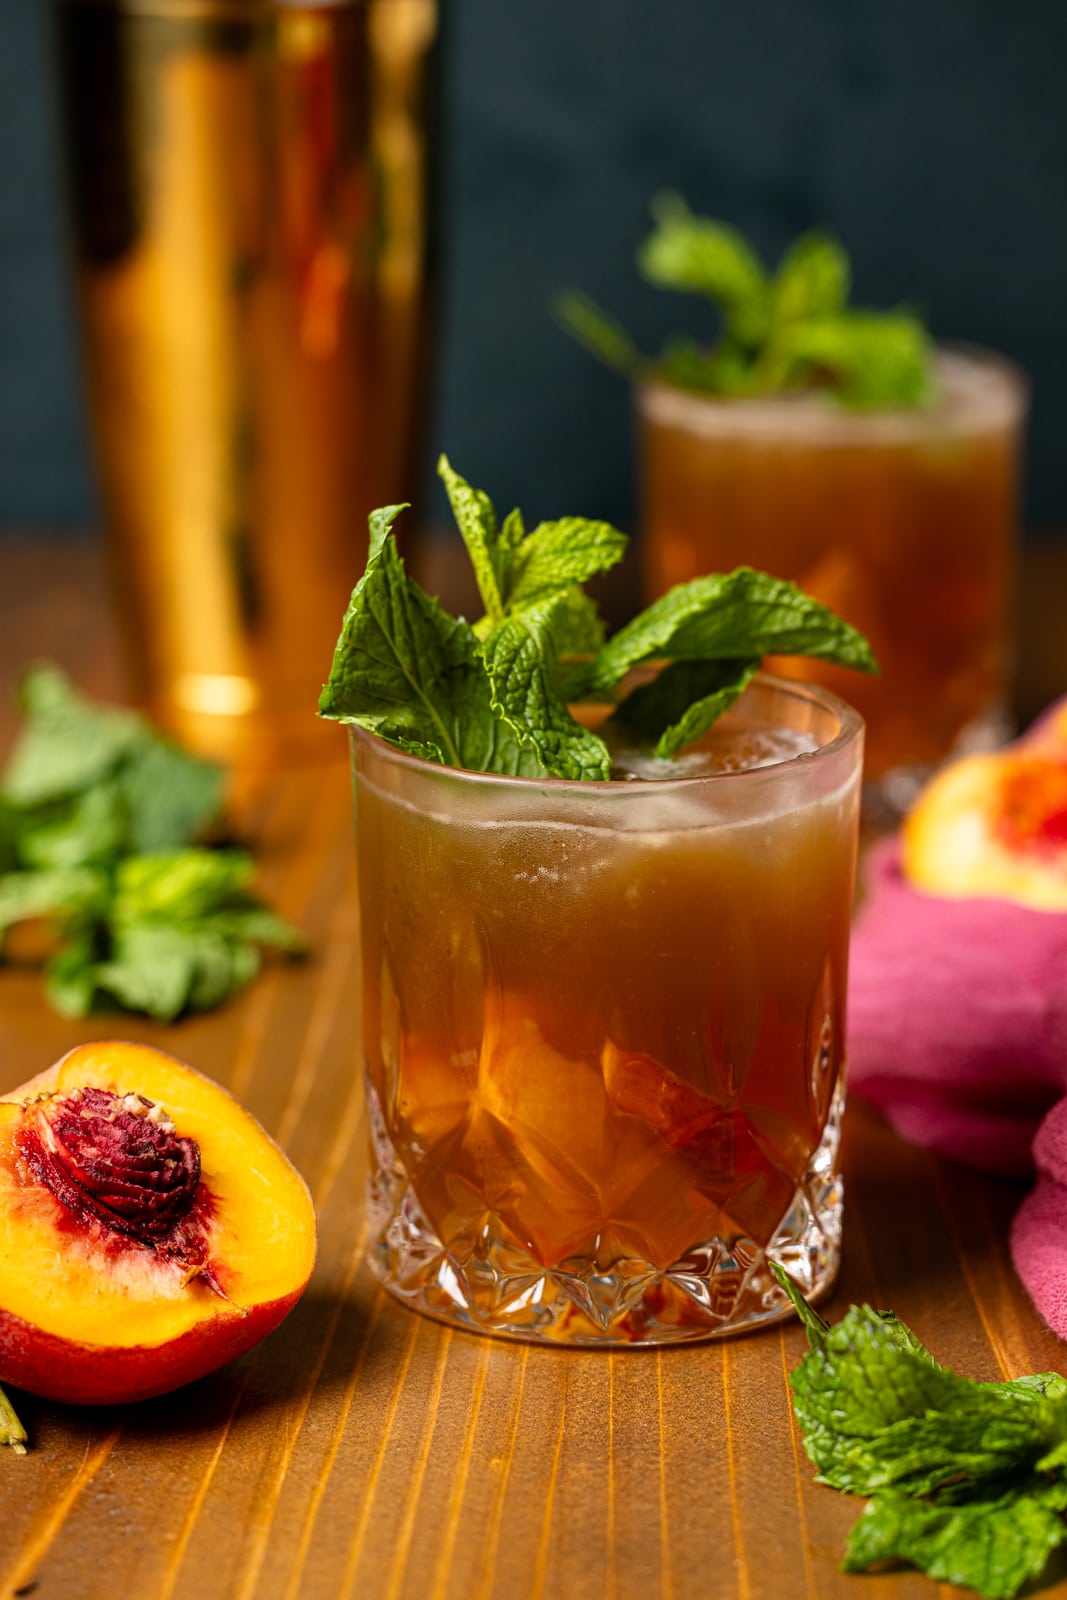 Mokctails in a glass with peaches, mint leaves, and a gold cocktail shaker.